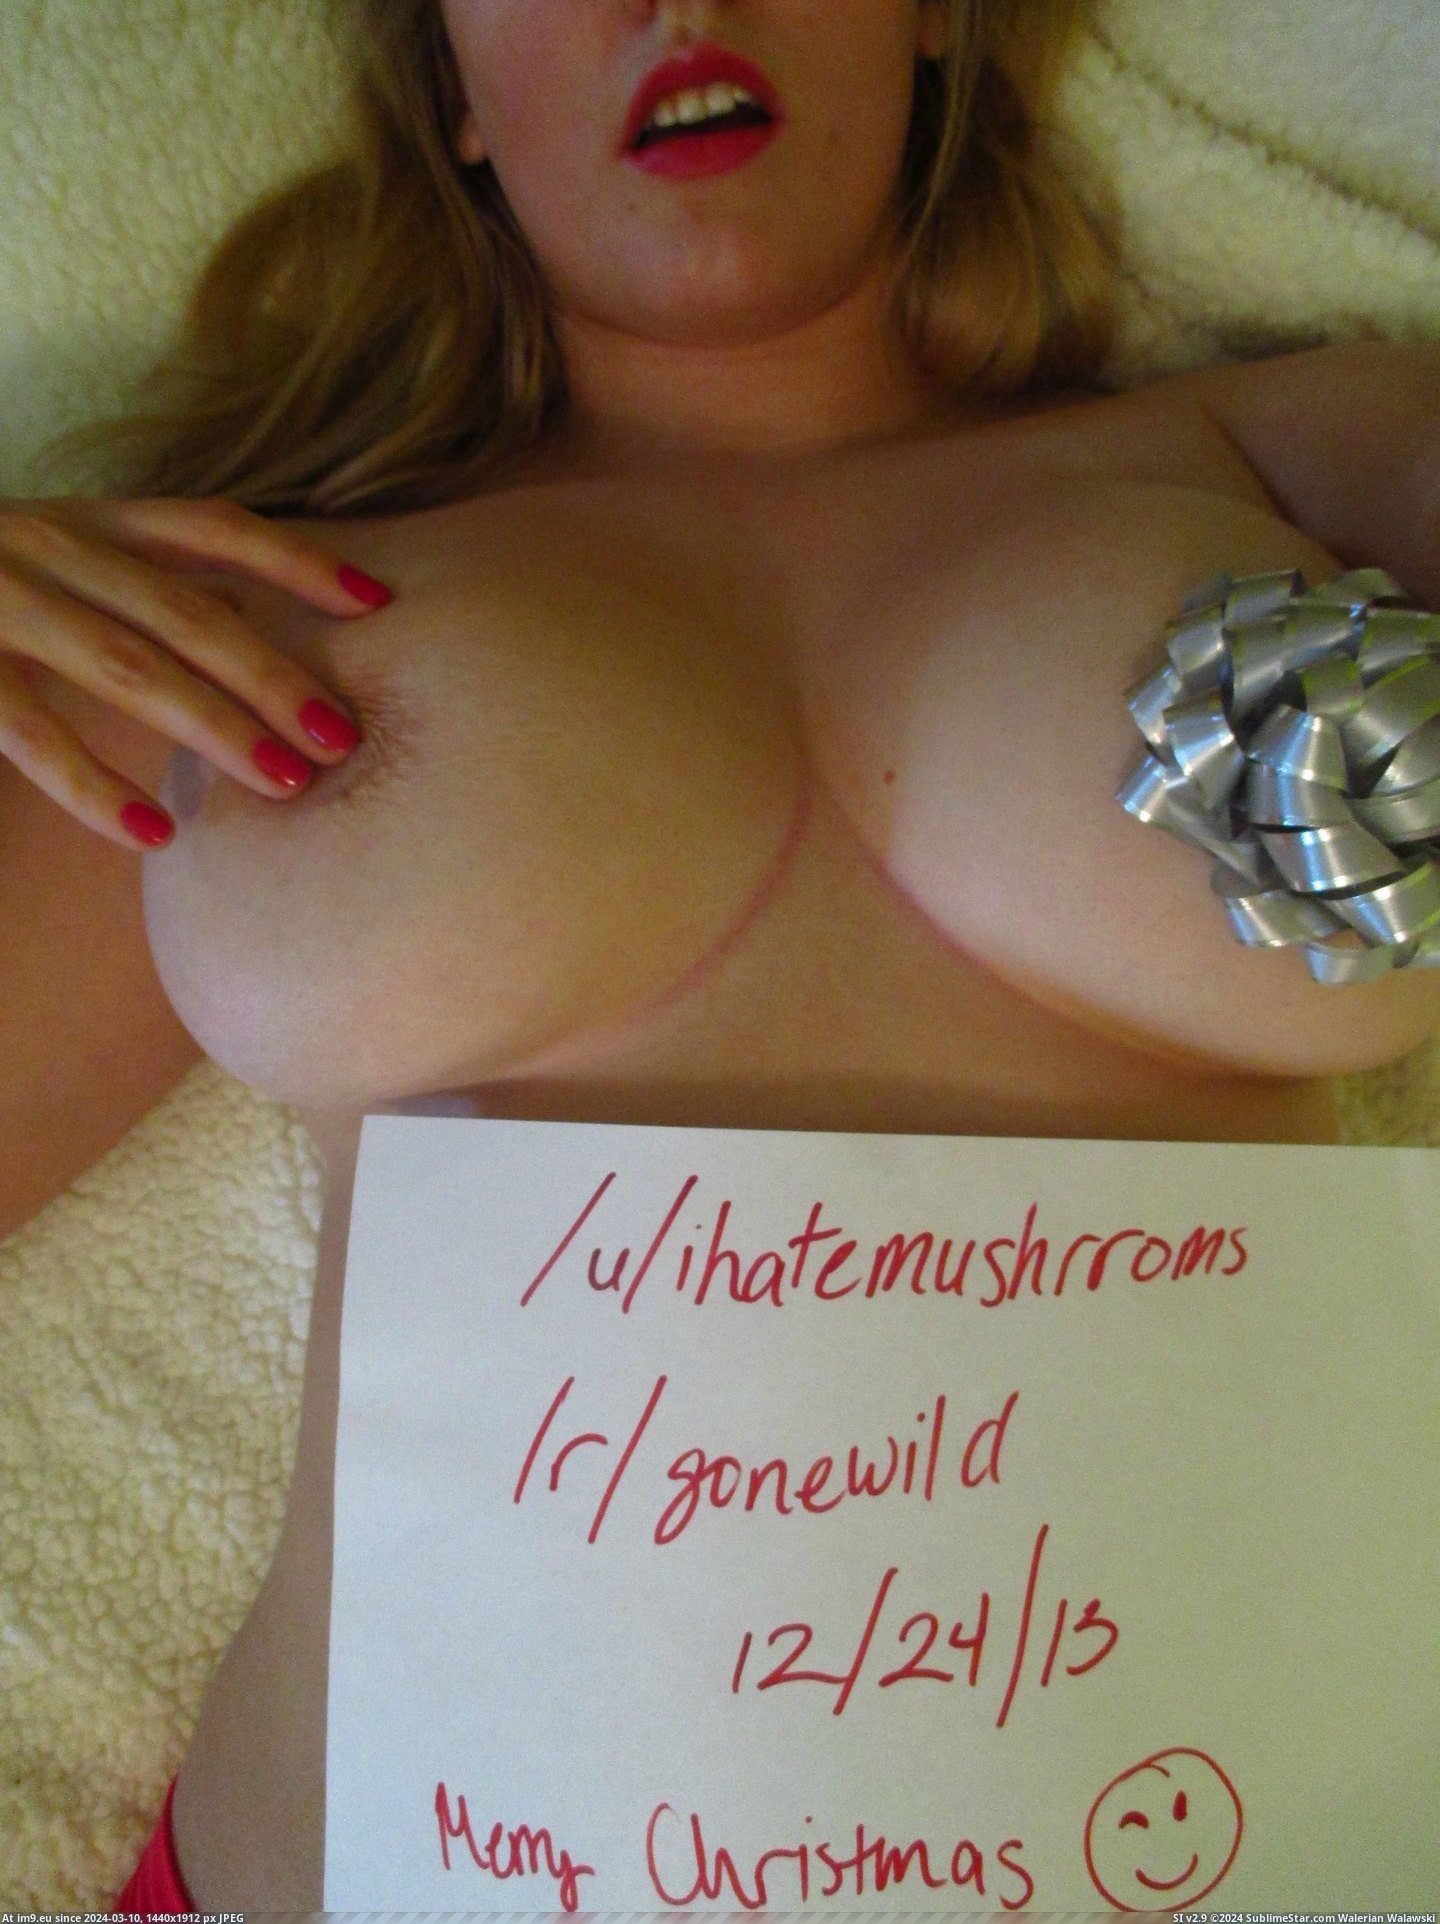 #For #Verification #Exchange #Downstairs #Peek #Unwrap [Gonewild] Who's up for a gi[f]t exchange? I'll unwrap myself for some verification (plus a little peek downstairs) 3 Pic. (Bild von album My r/GONEWILD favs))